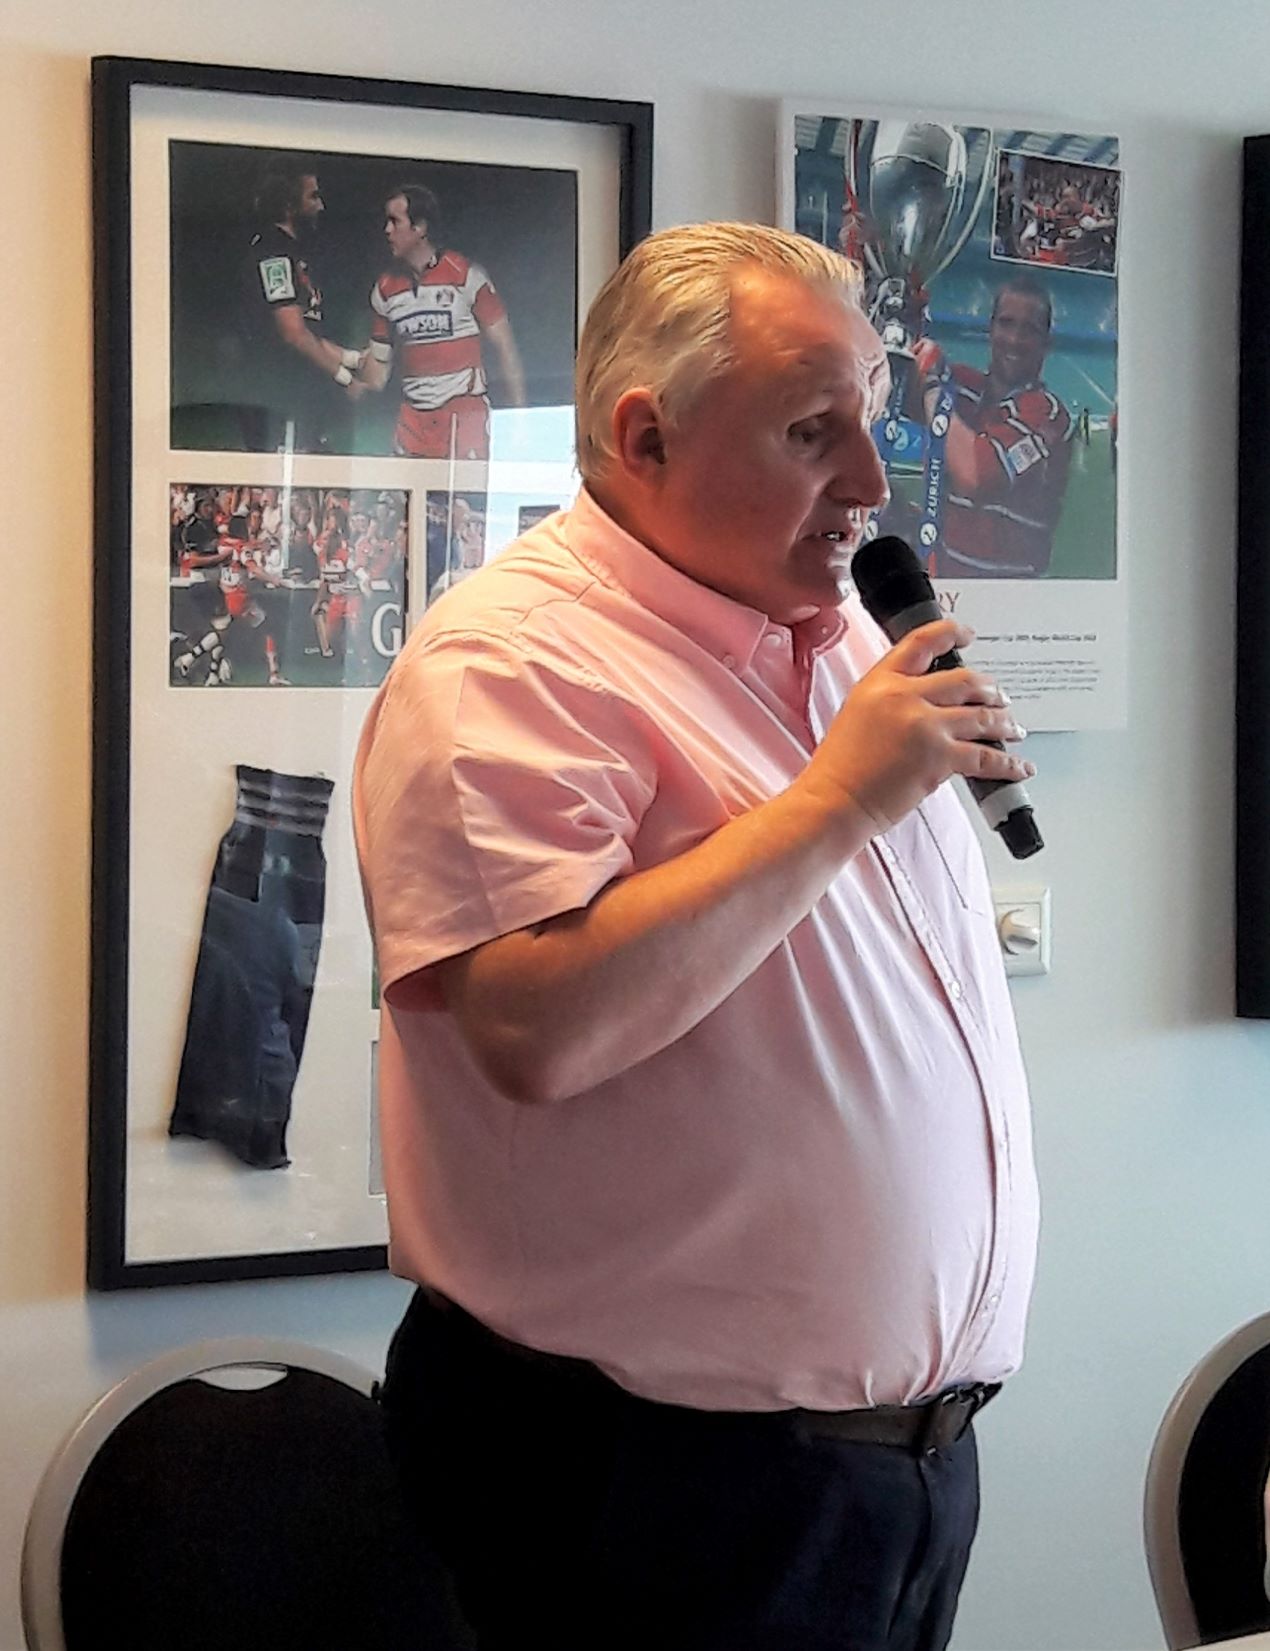 Alun Davies, Engagement manager for Gloucestershire speaking at the Make Transport Accessible forum. He is standing up, talking into a microphone. He is wearing a short sleeve, pale pink shirt and black trousers. Behind him are framed photographs of rugby players on the wall.